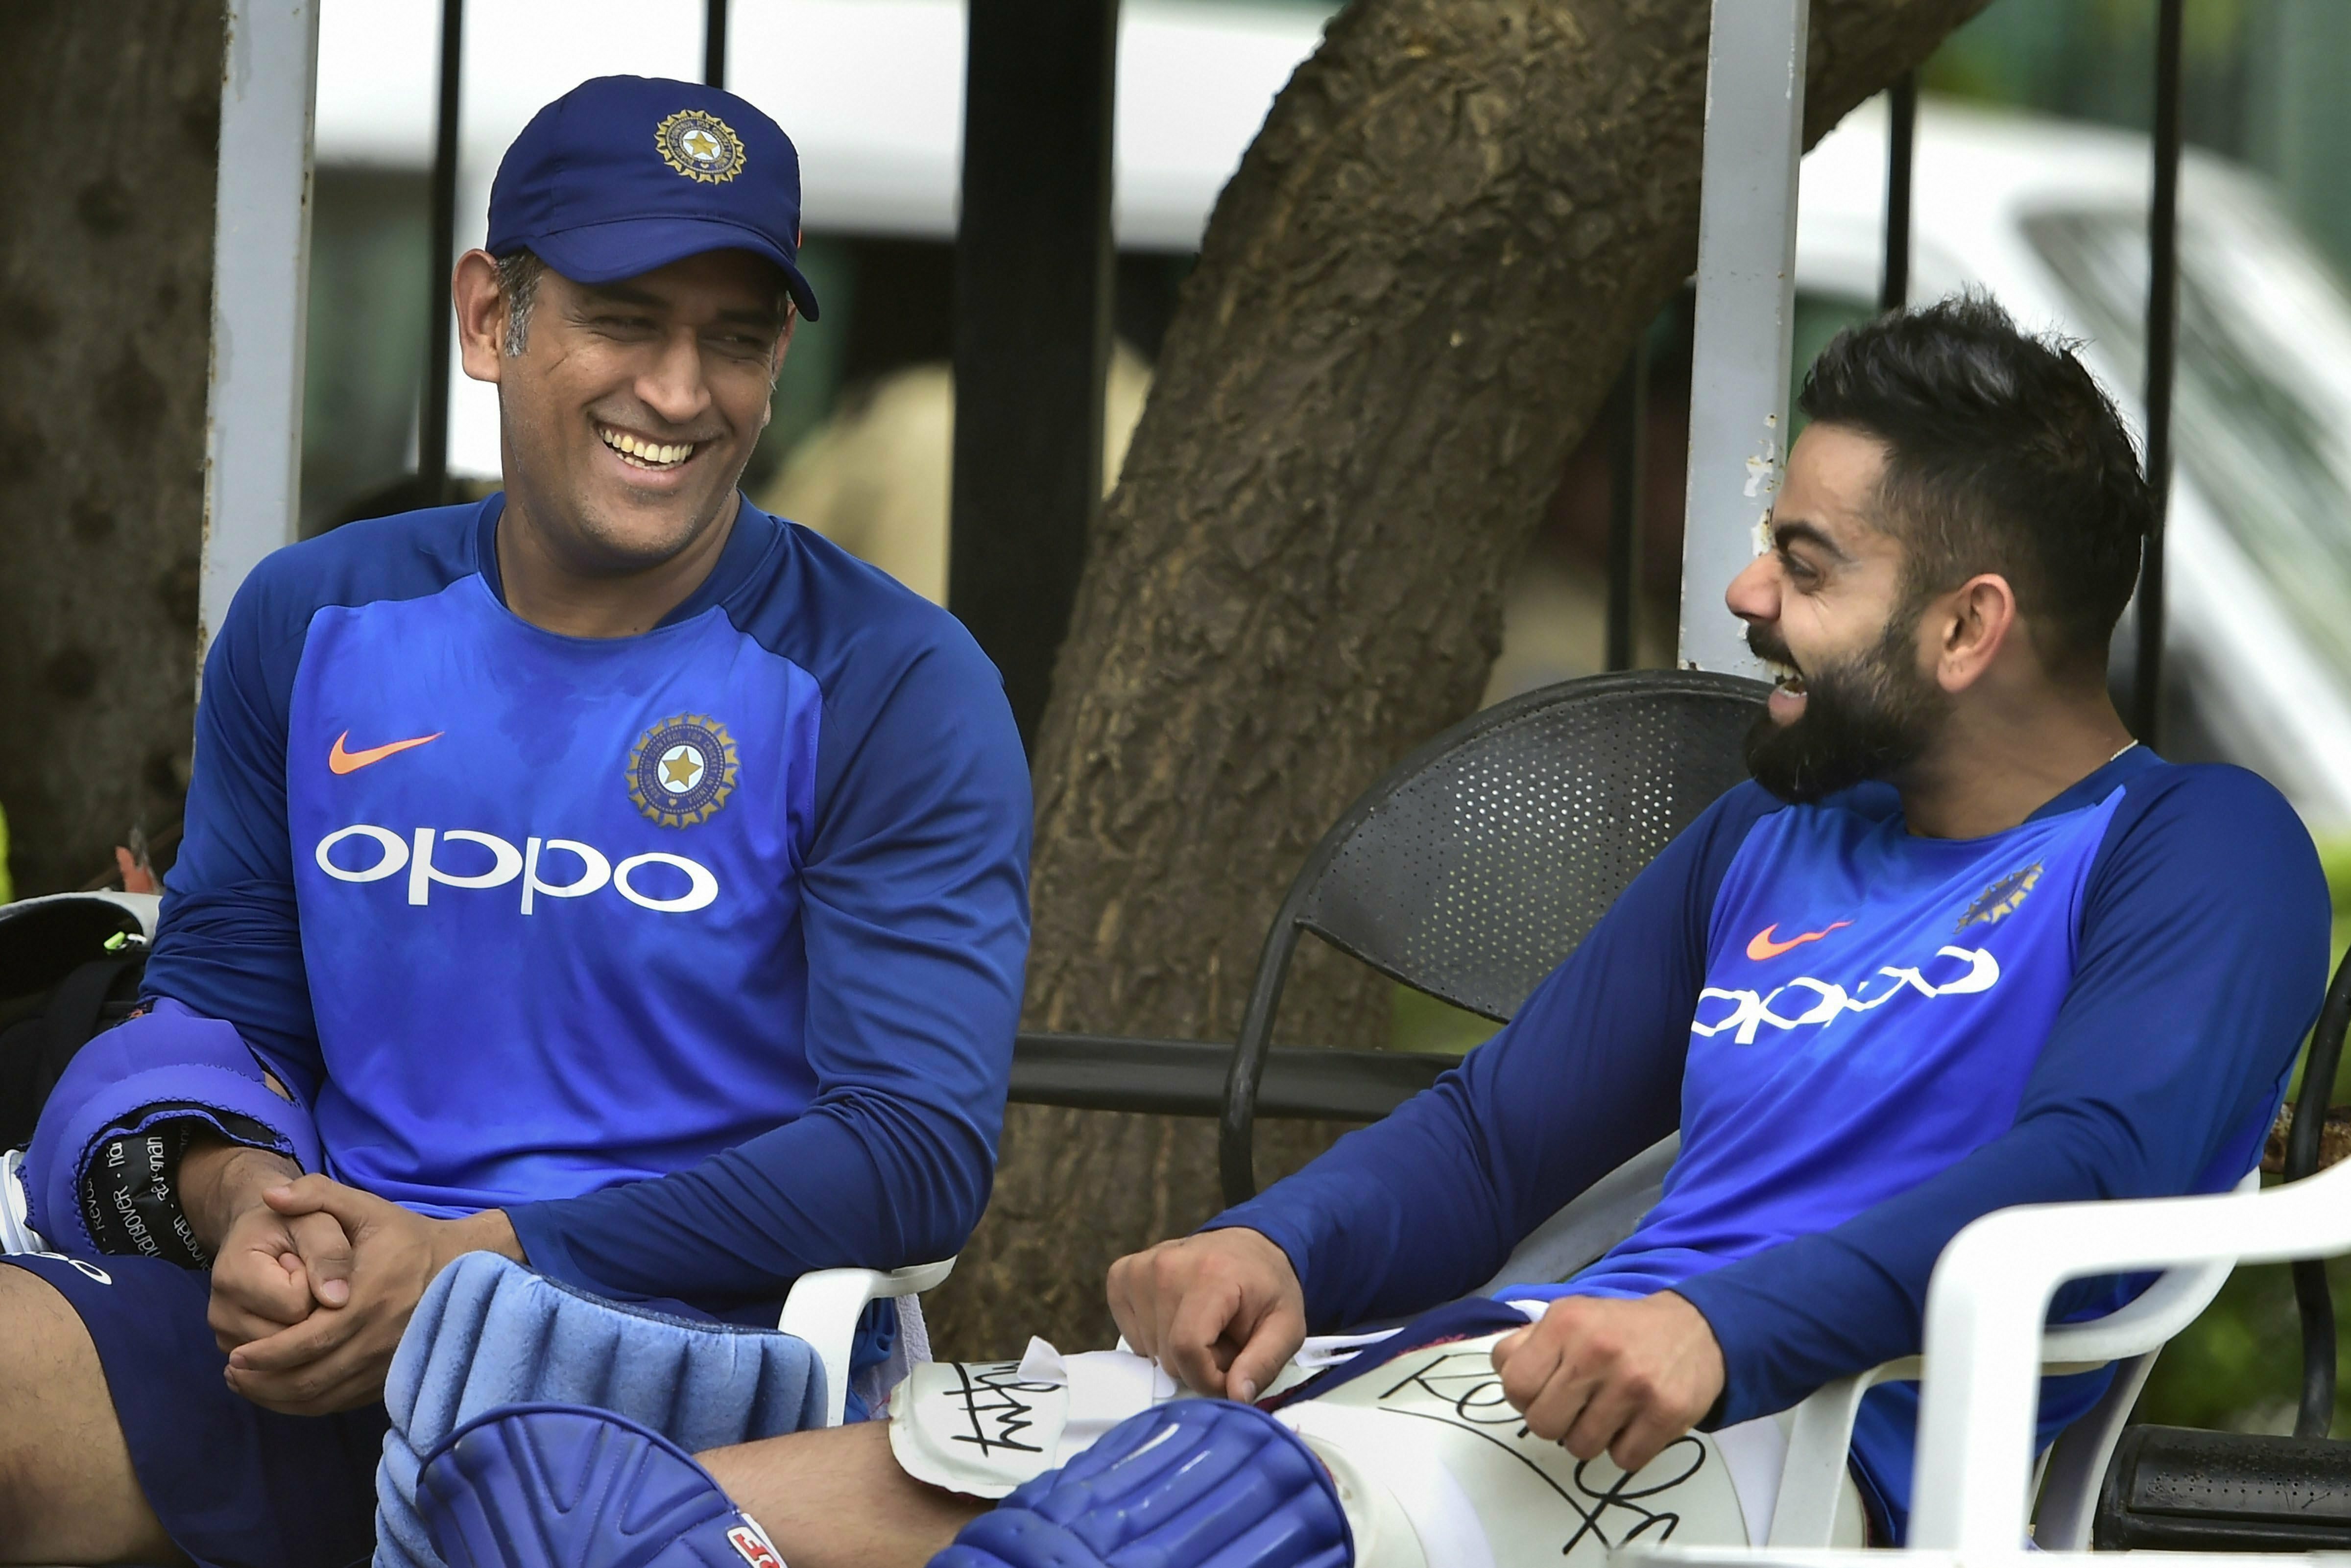 Indian cricket team captain Virat Kohli and MS Dhoni during a practice session ahead of their first One Day International (ODI) series cricket match against Australia at Rajiv Gandhi International Cricket Stadium, in Hyderabad - PTI